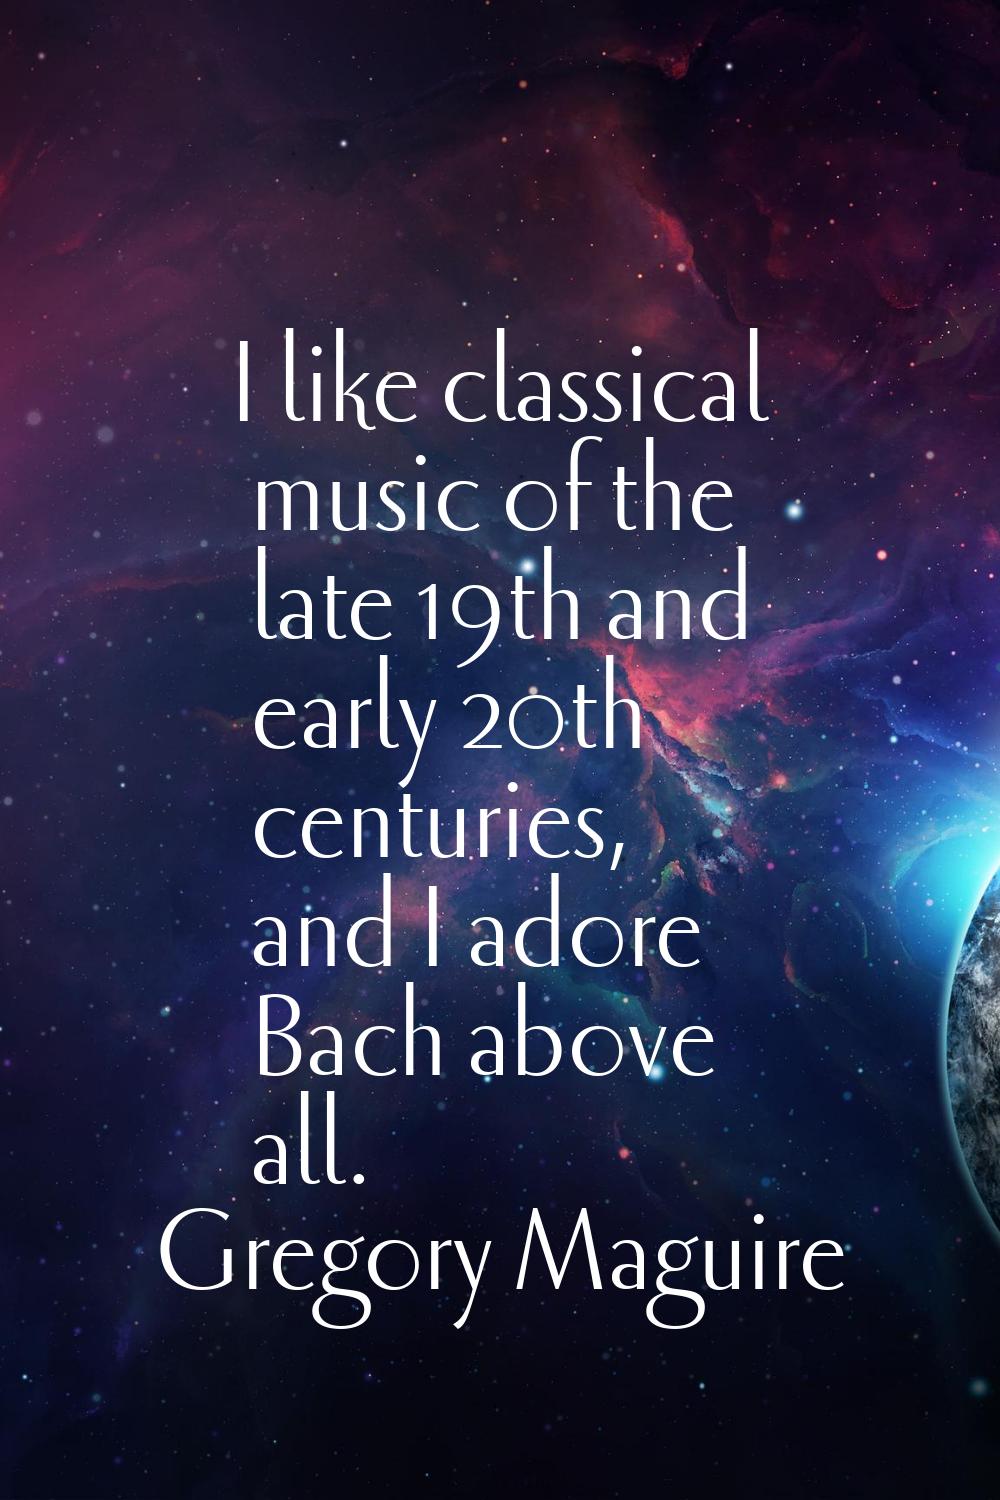 I like classical music of the late 19th and early 20th centuries, and I adore Bach above all.